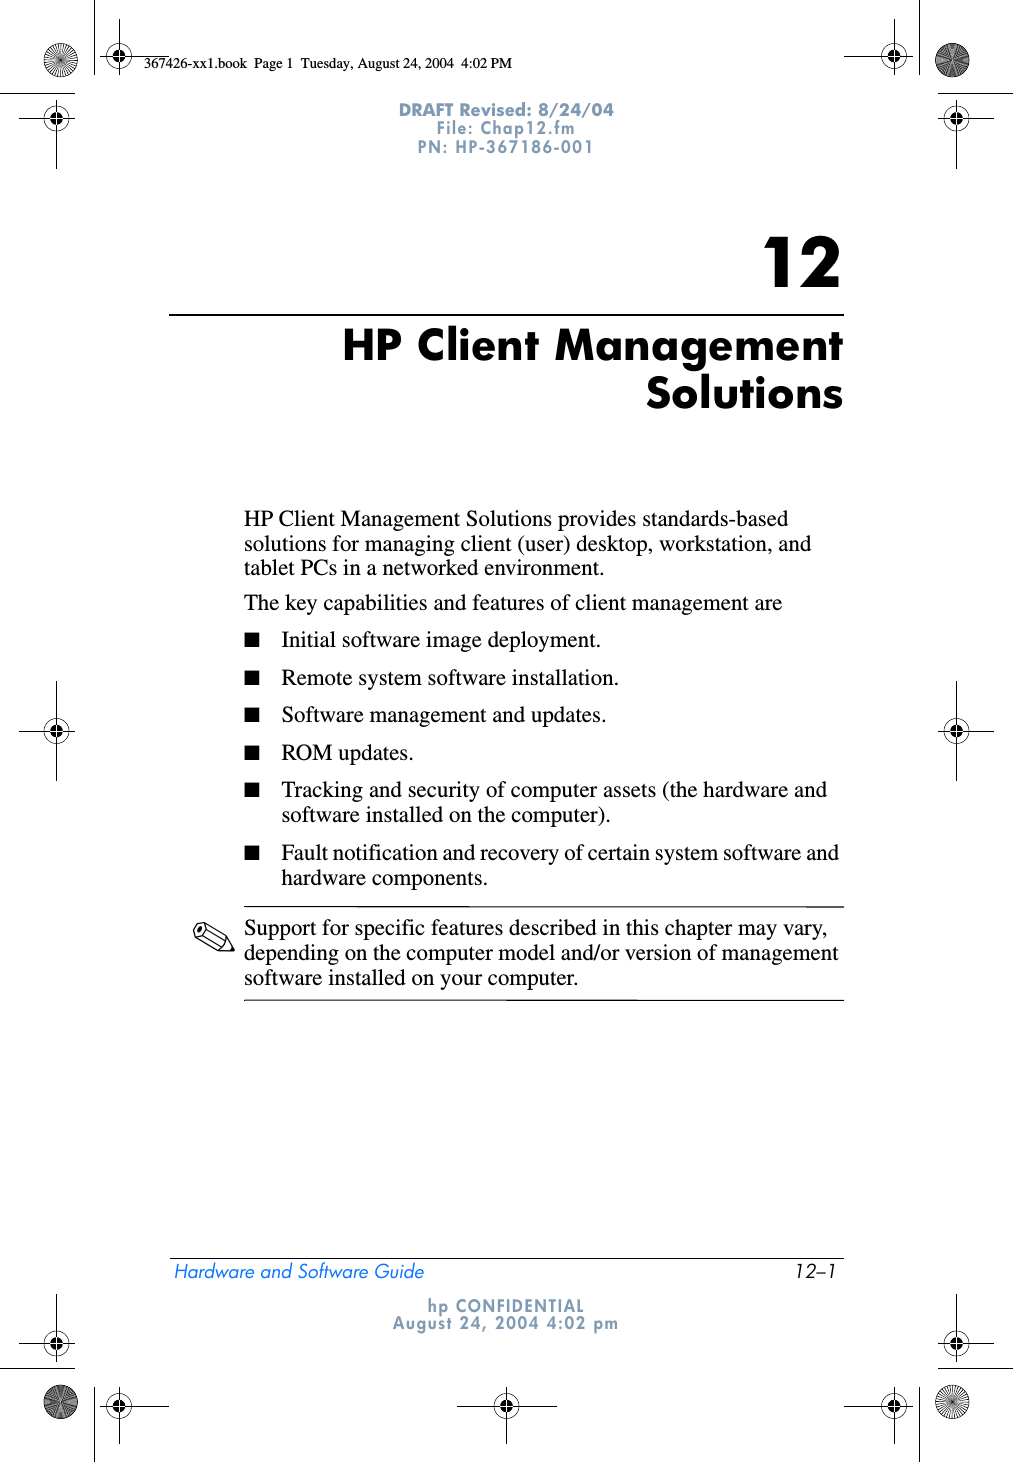 Hardware and Software Guide 12–1DRAFT Revised: 8/24/04File: Chap12.fm PN: HP-367186-001 hp CONFIDENTIALAugust 24, 2004 4:02 pm12HP Client ManagementSolutionsHP Client Management Solutions provides standards-based solutions for managing client (user) desktop, workstation, and tablet PCs in a networked environment.The key capabilities and features of client management are■Initial software image deployment.■Remote system software installation.■Software management and updates.■ROM updates.■Tracking and security of computer assets (the hardware and software installed on the computer).■Fault notification and recovery of certain system software and hardware components.✎Support for specific features described in this chapter may vary, depending on the computer model and/or version of management software installed on your computer.367426-xx1.book  Page 1  Tuesday, August 24, 2004  4:02 PM